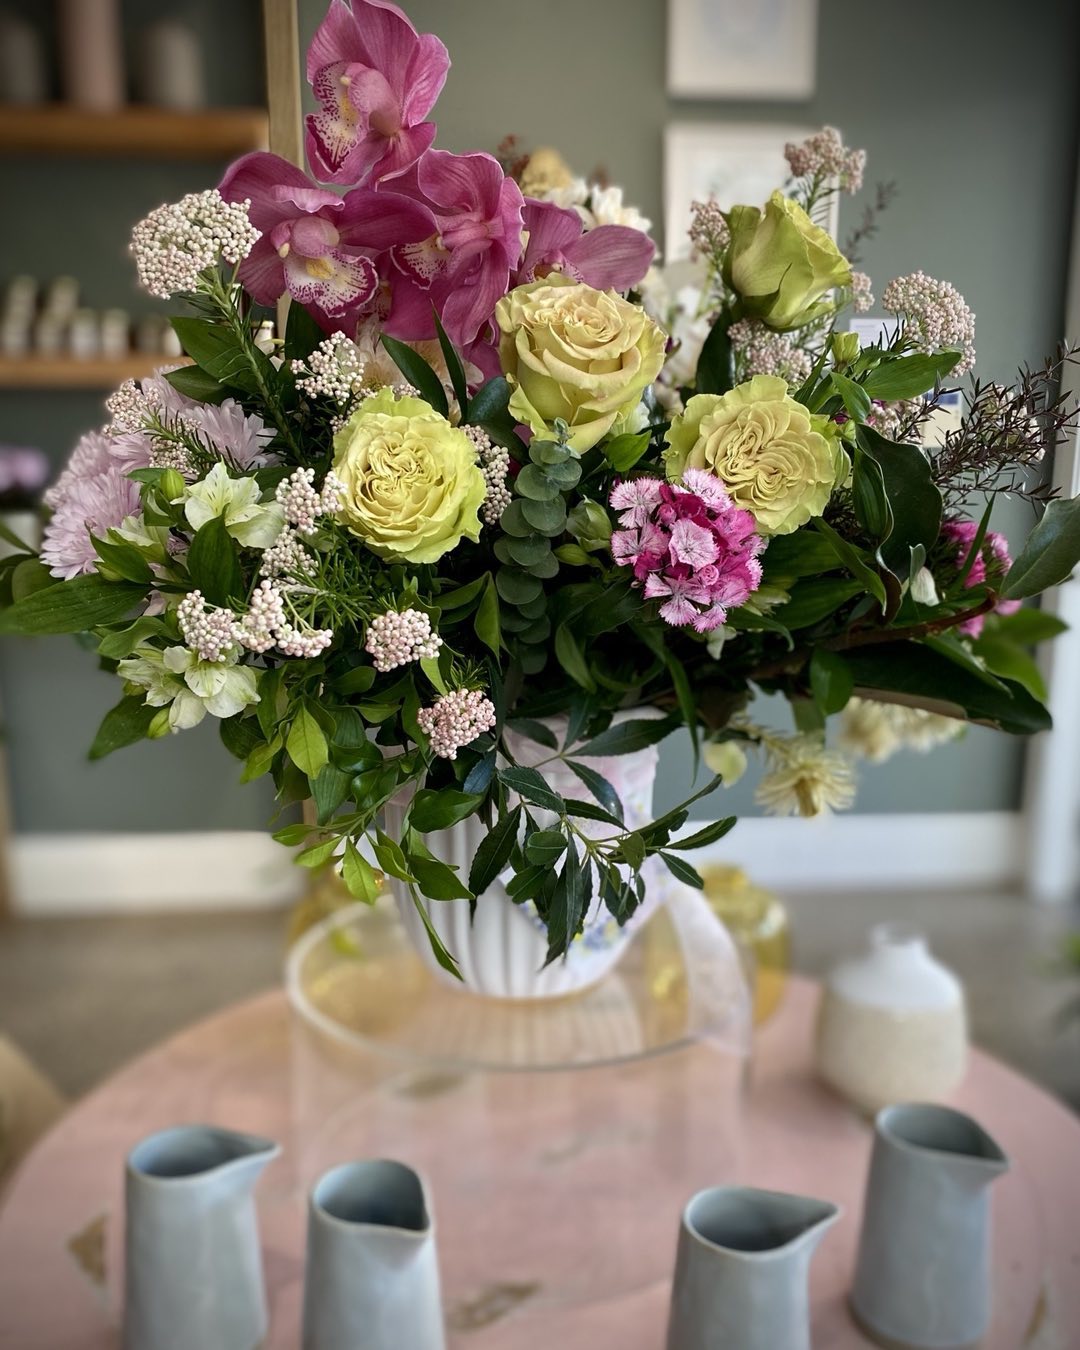 Large fresh flower arrangement of green and pink flowers